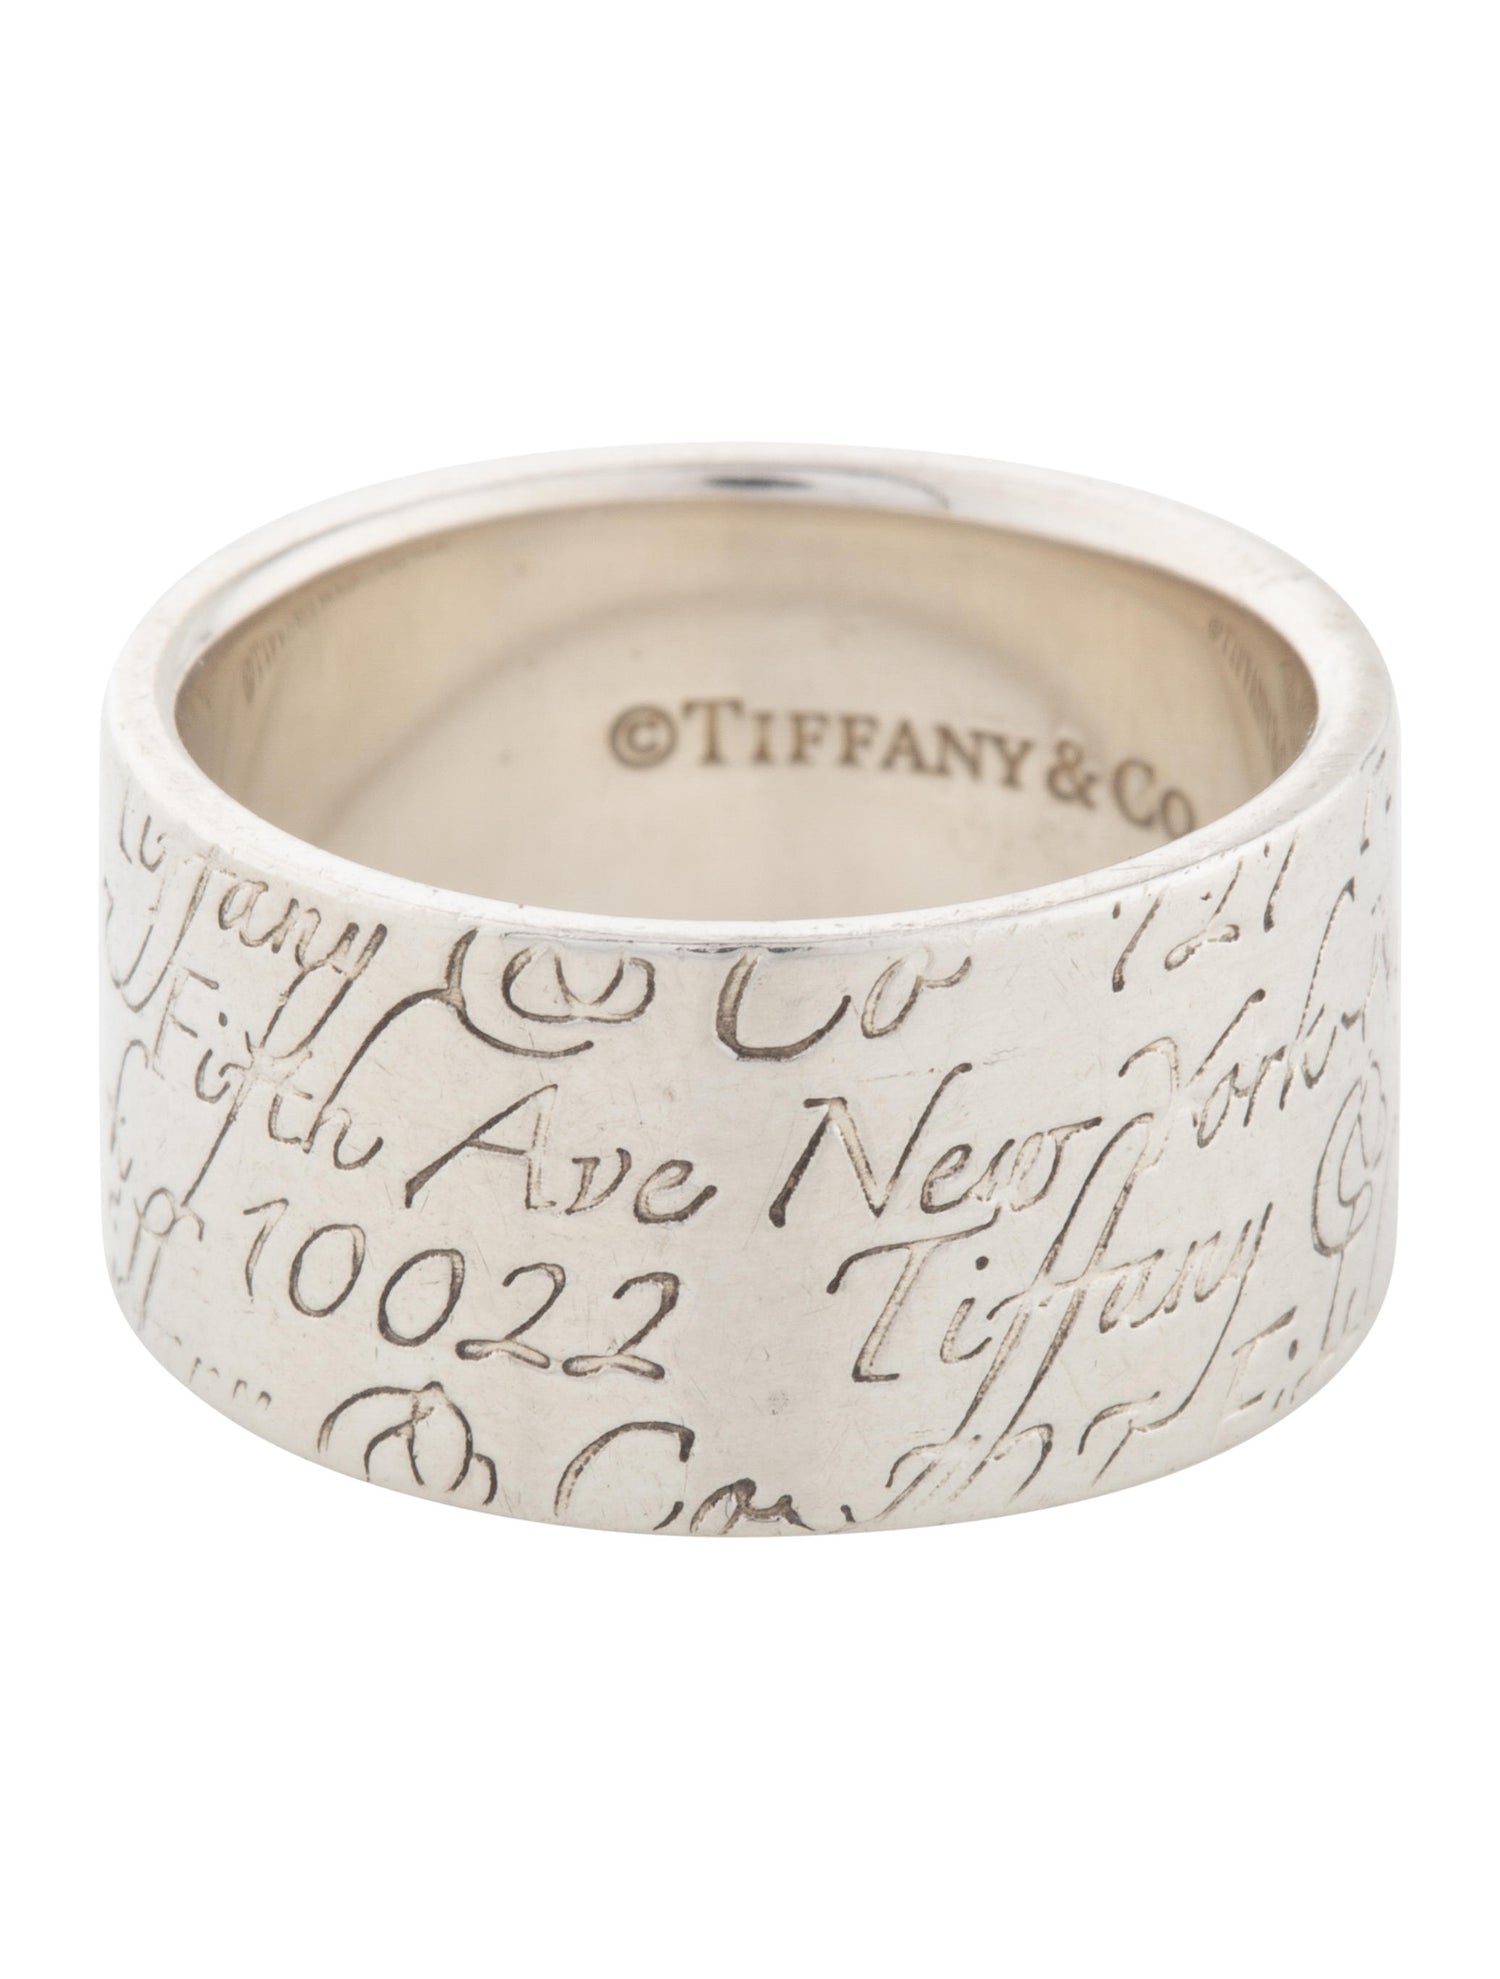 Tiffany Notes Wide Ring